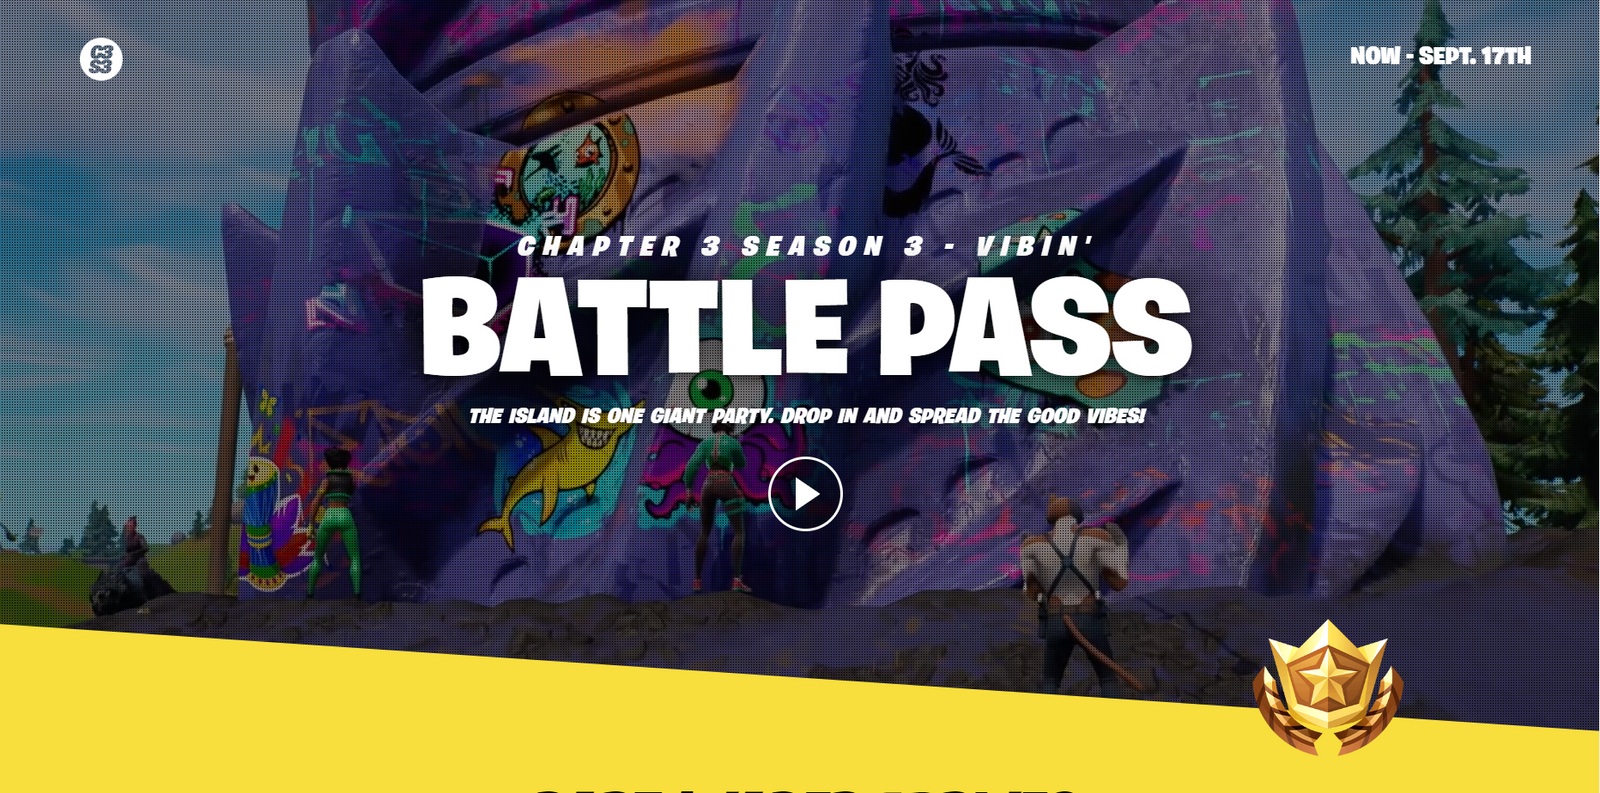 A screenshot of the official battle pass page gives us a clue for Fortnite Season 4 and its release date.